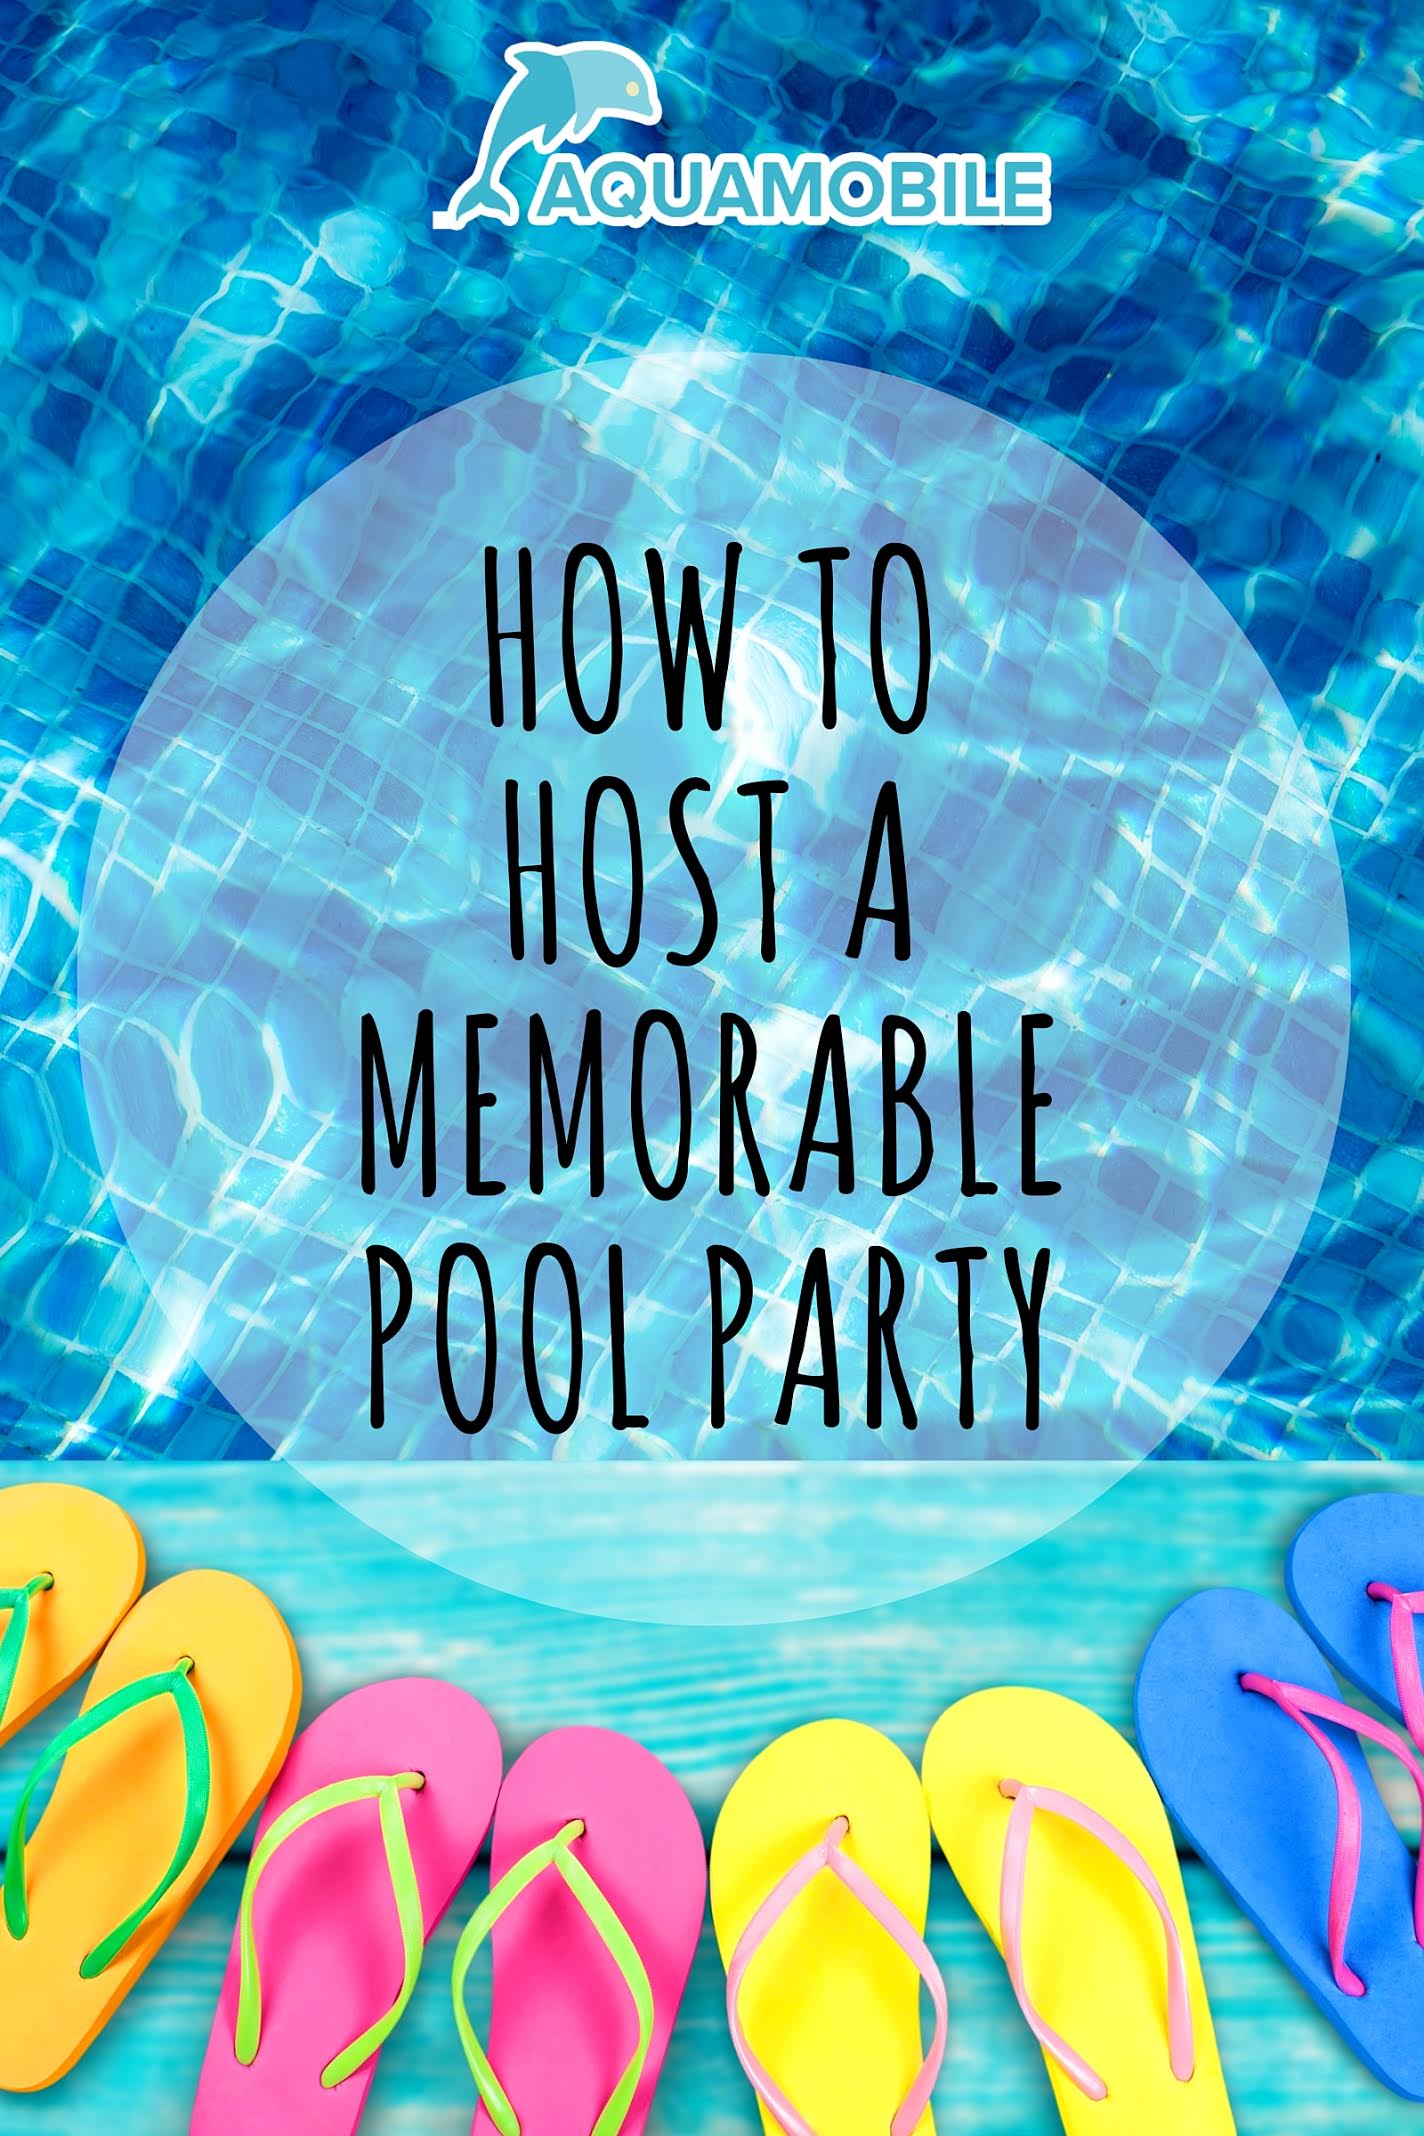 How to Host a Memorable Pool Party